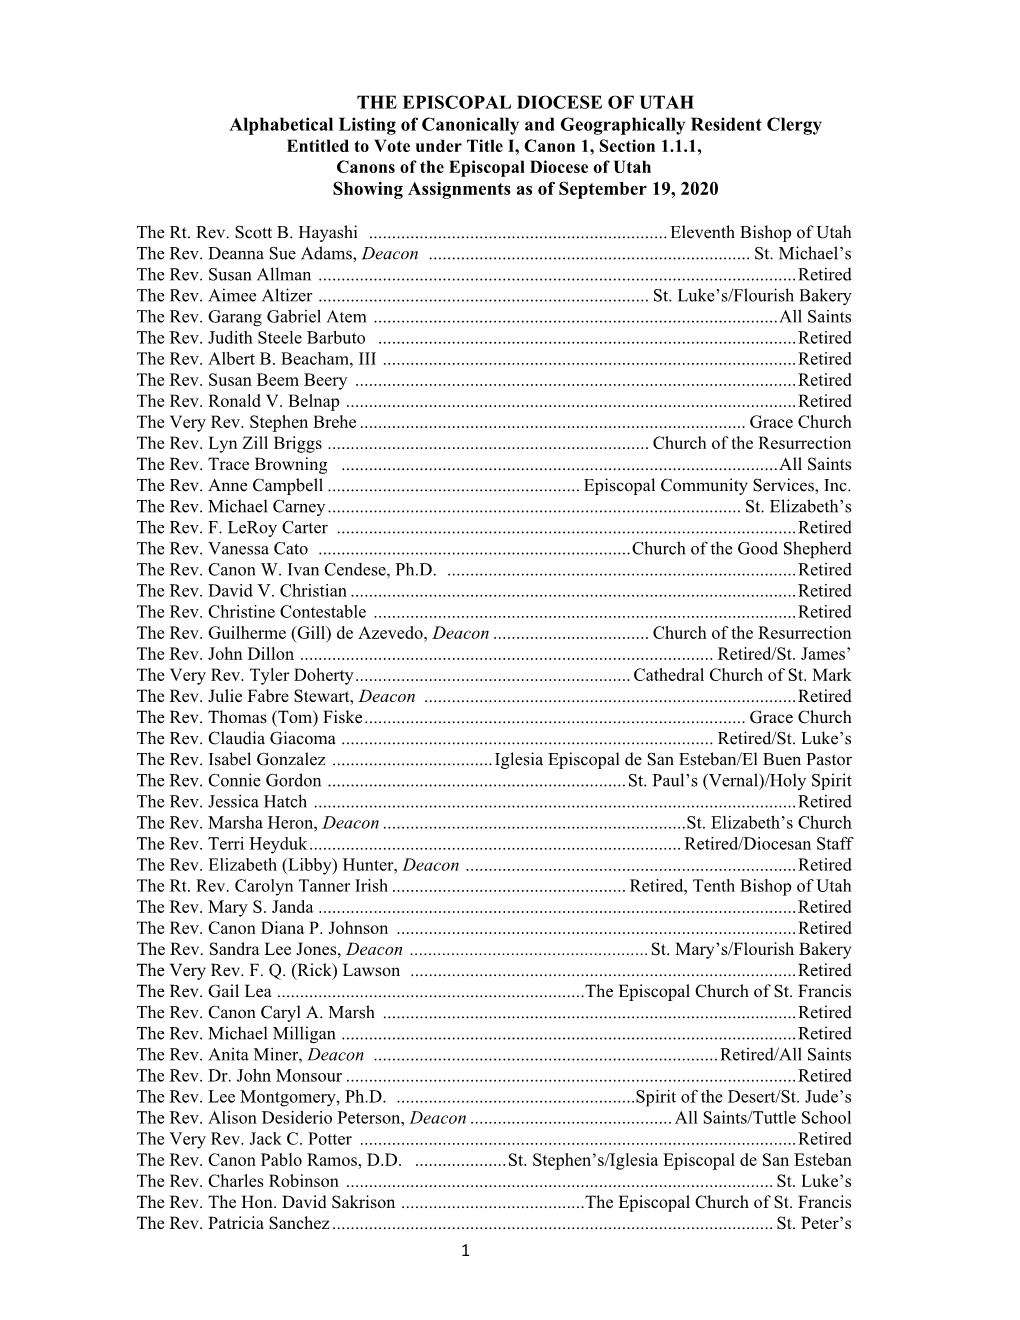 THE EPISCOPAL DIOCESE of UTAH Alphabetical Listing of Canonically